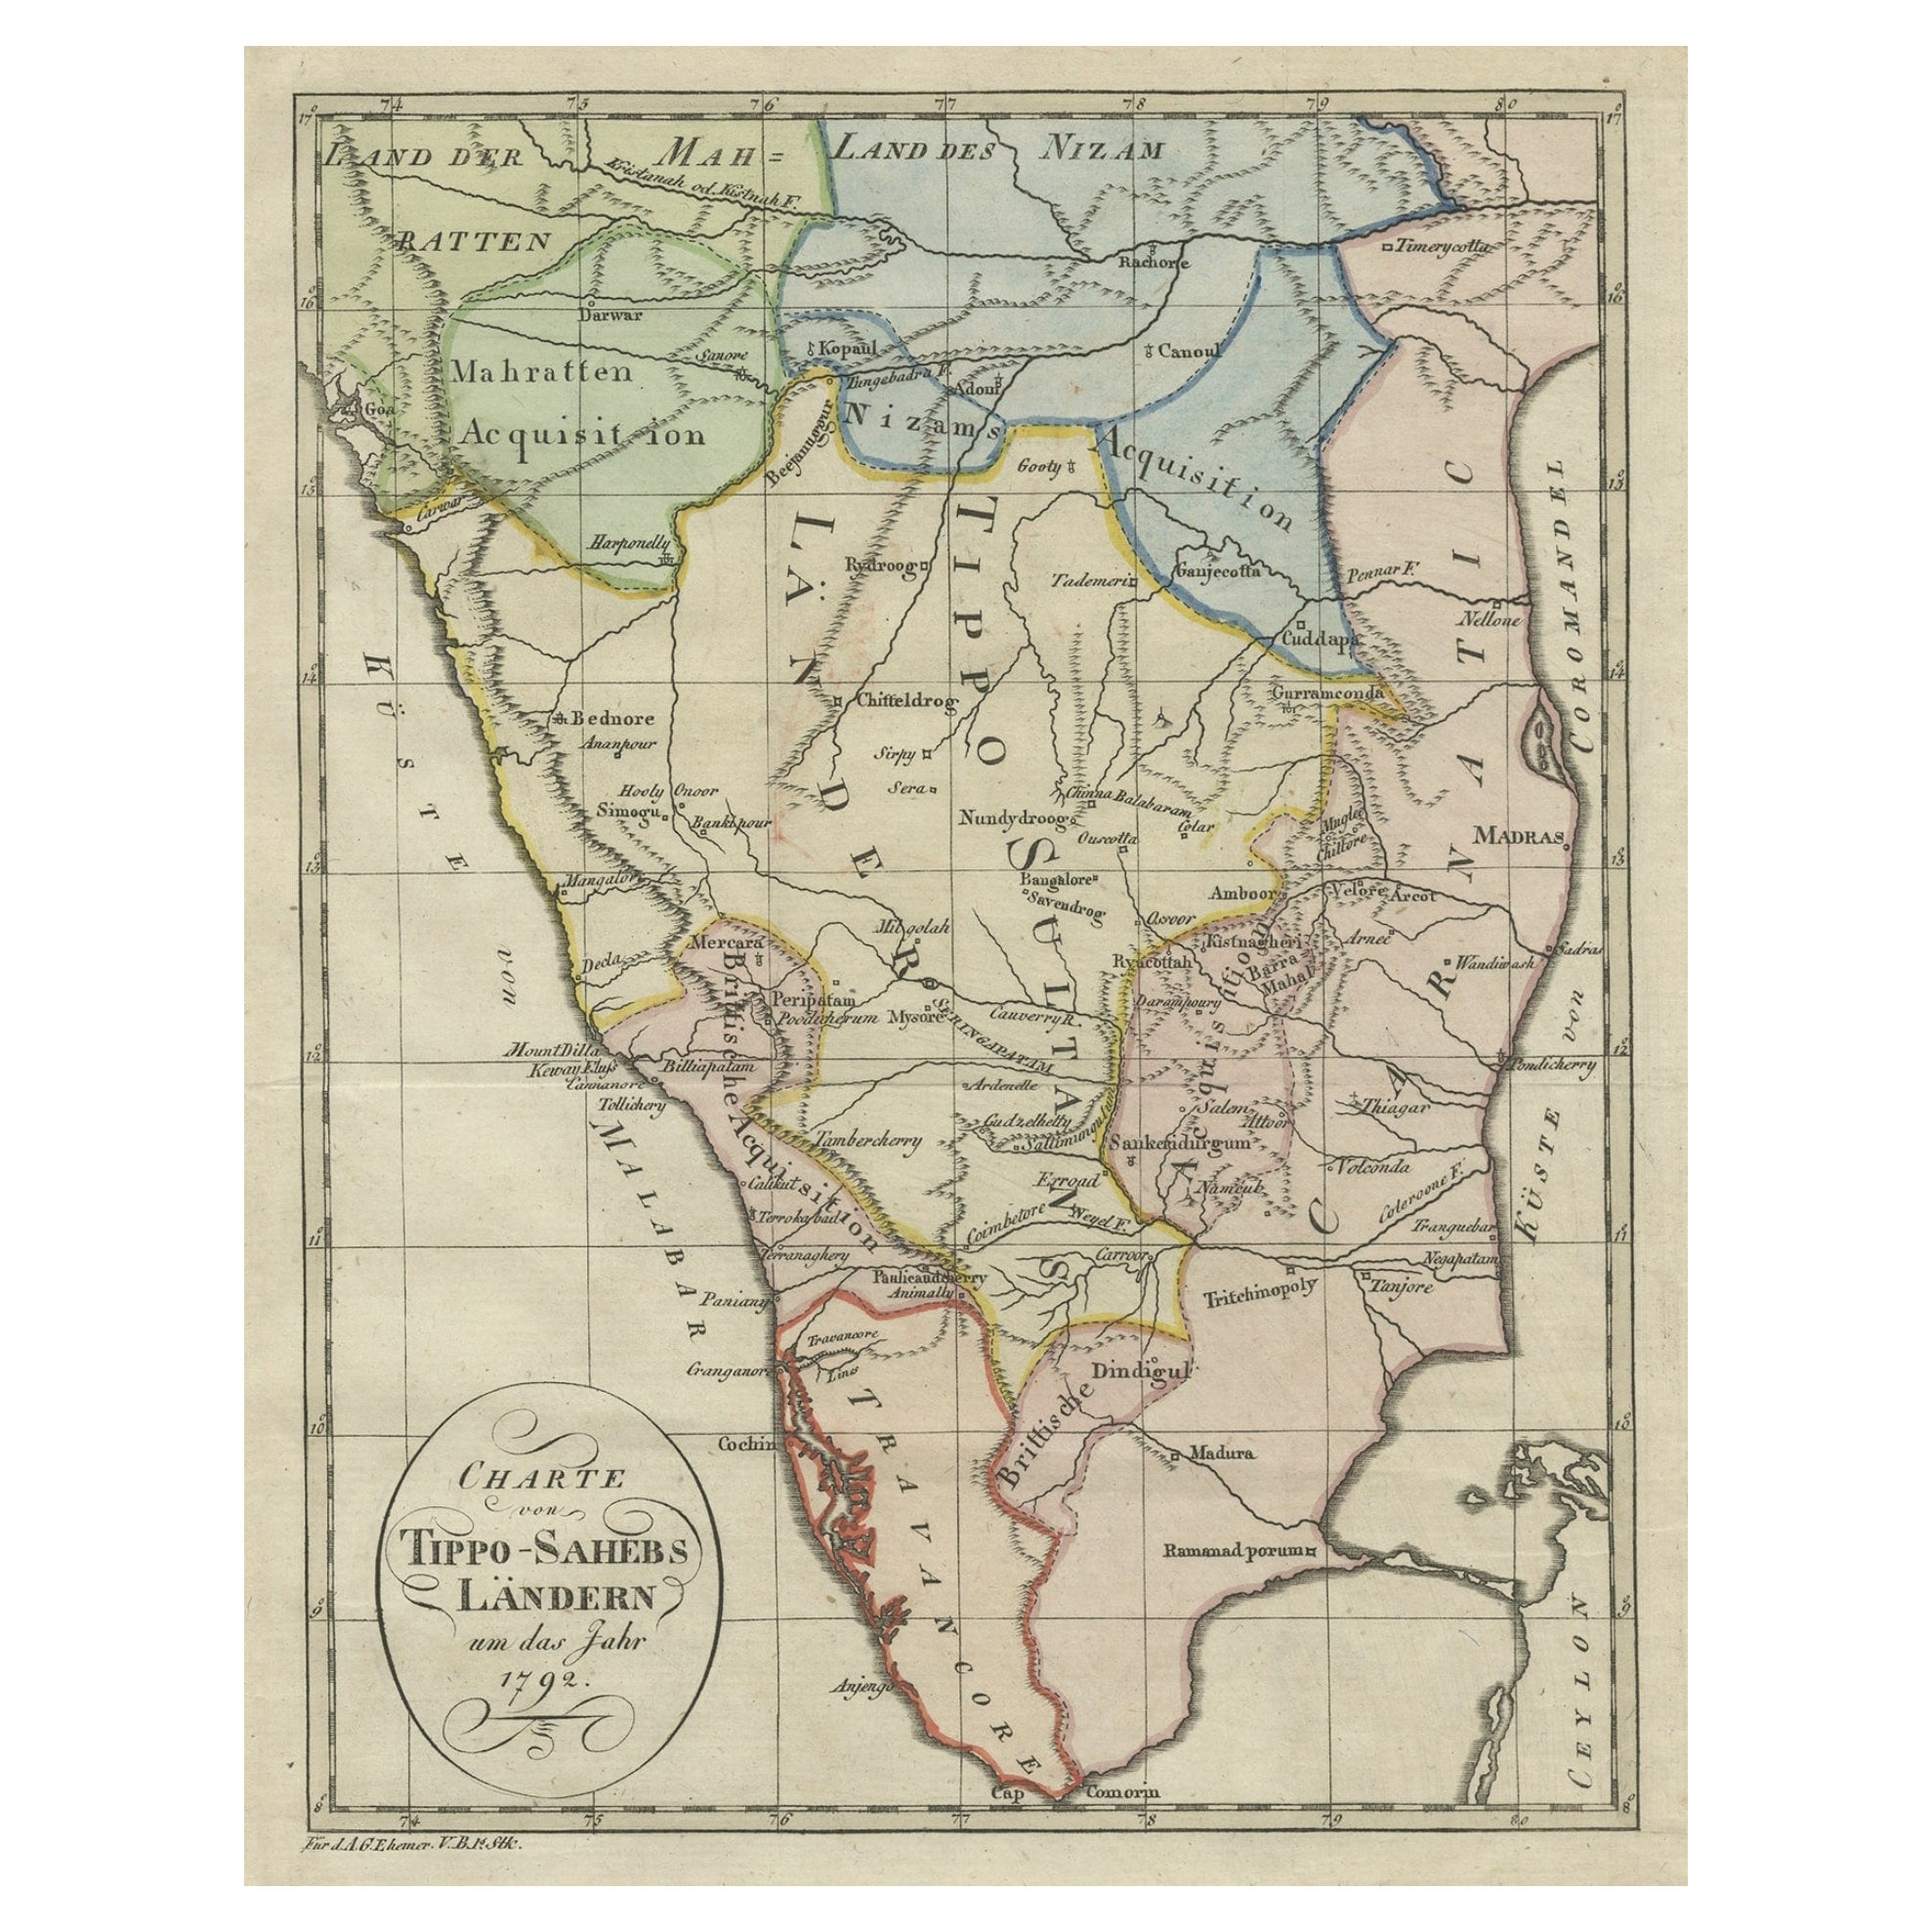 Original Map of Southern India with Kingdom Mysore, Ruled by Tipu Sultan, 1800